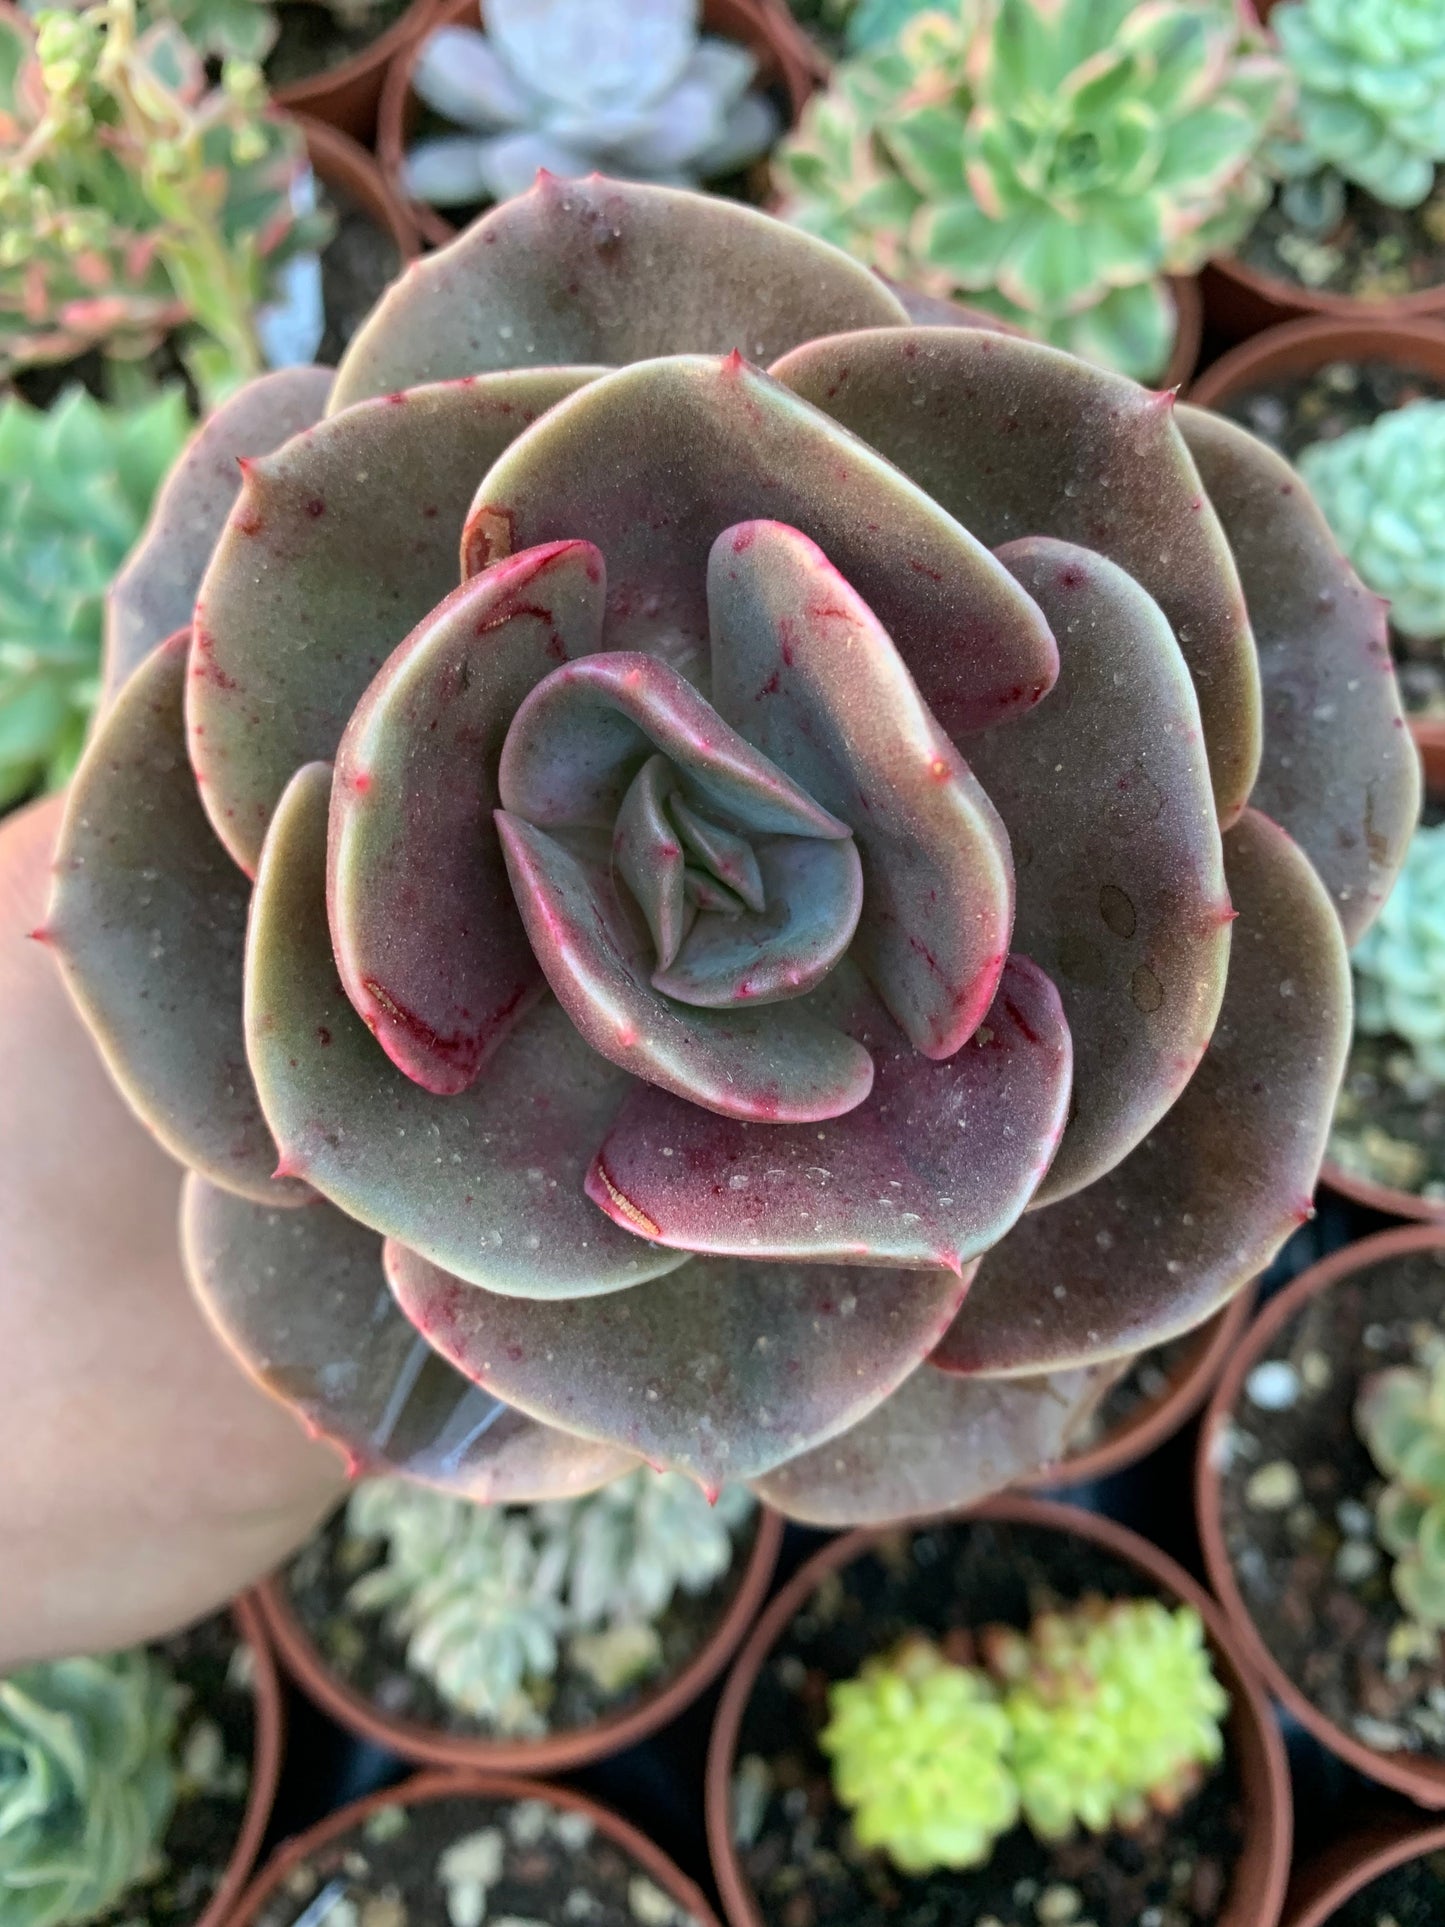 Echeveria "Dusty Rose" by Renee O'Connell